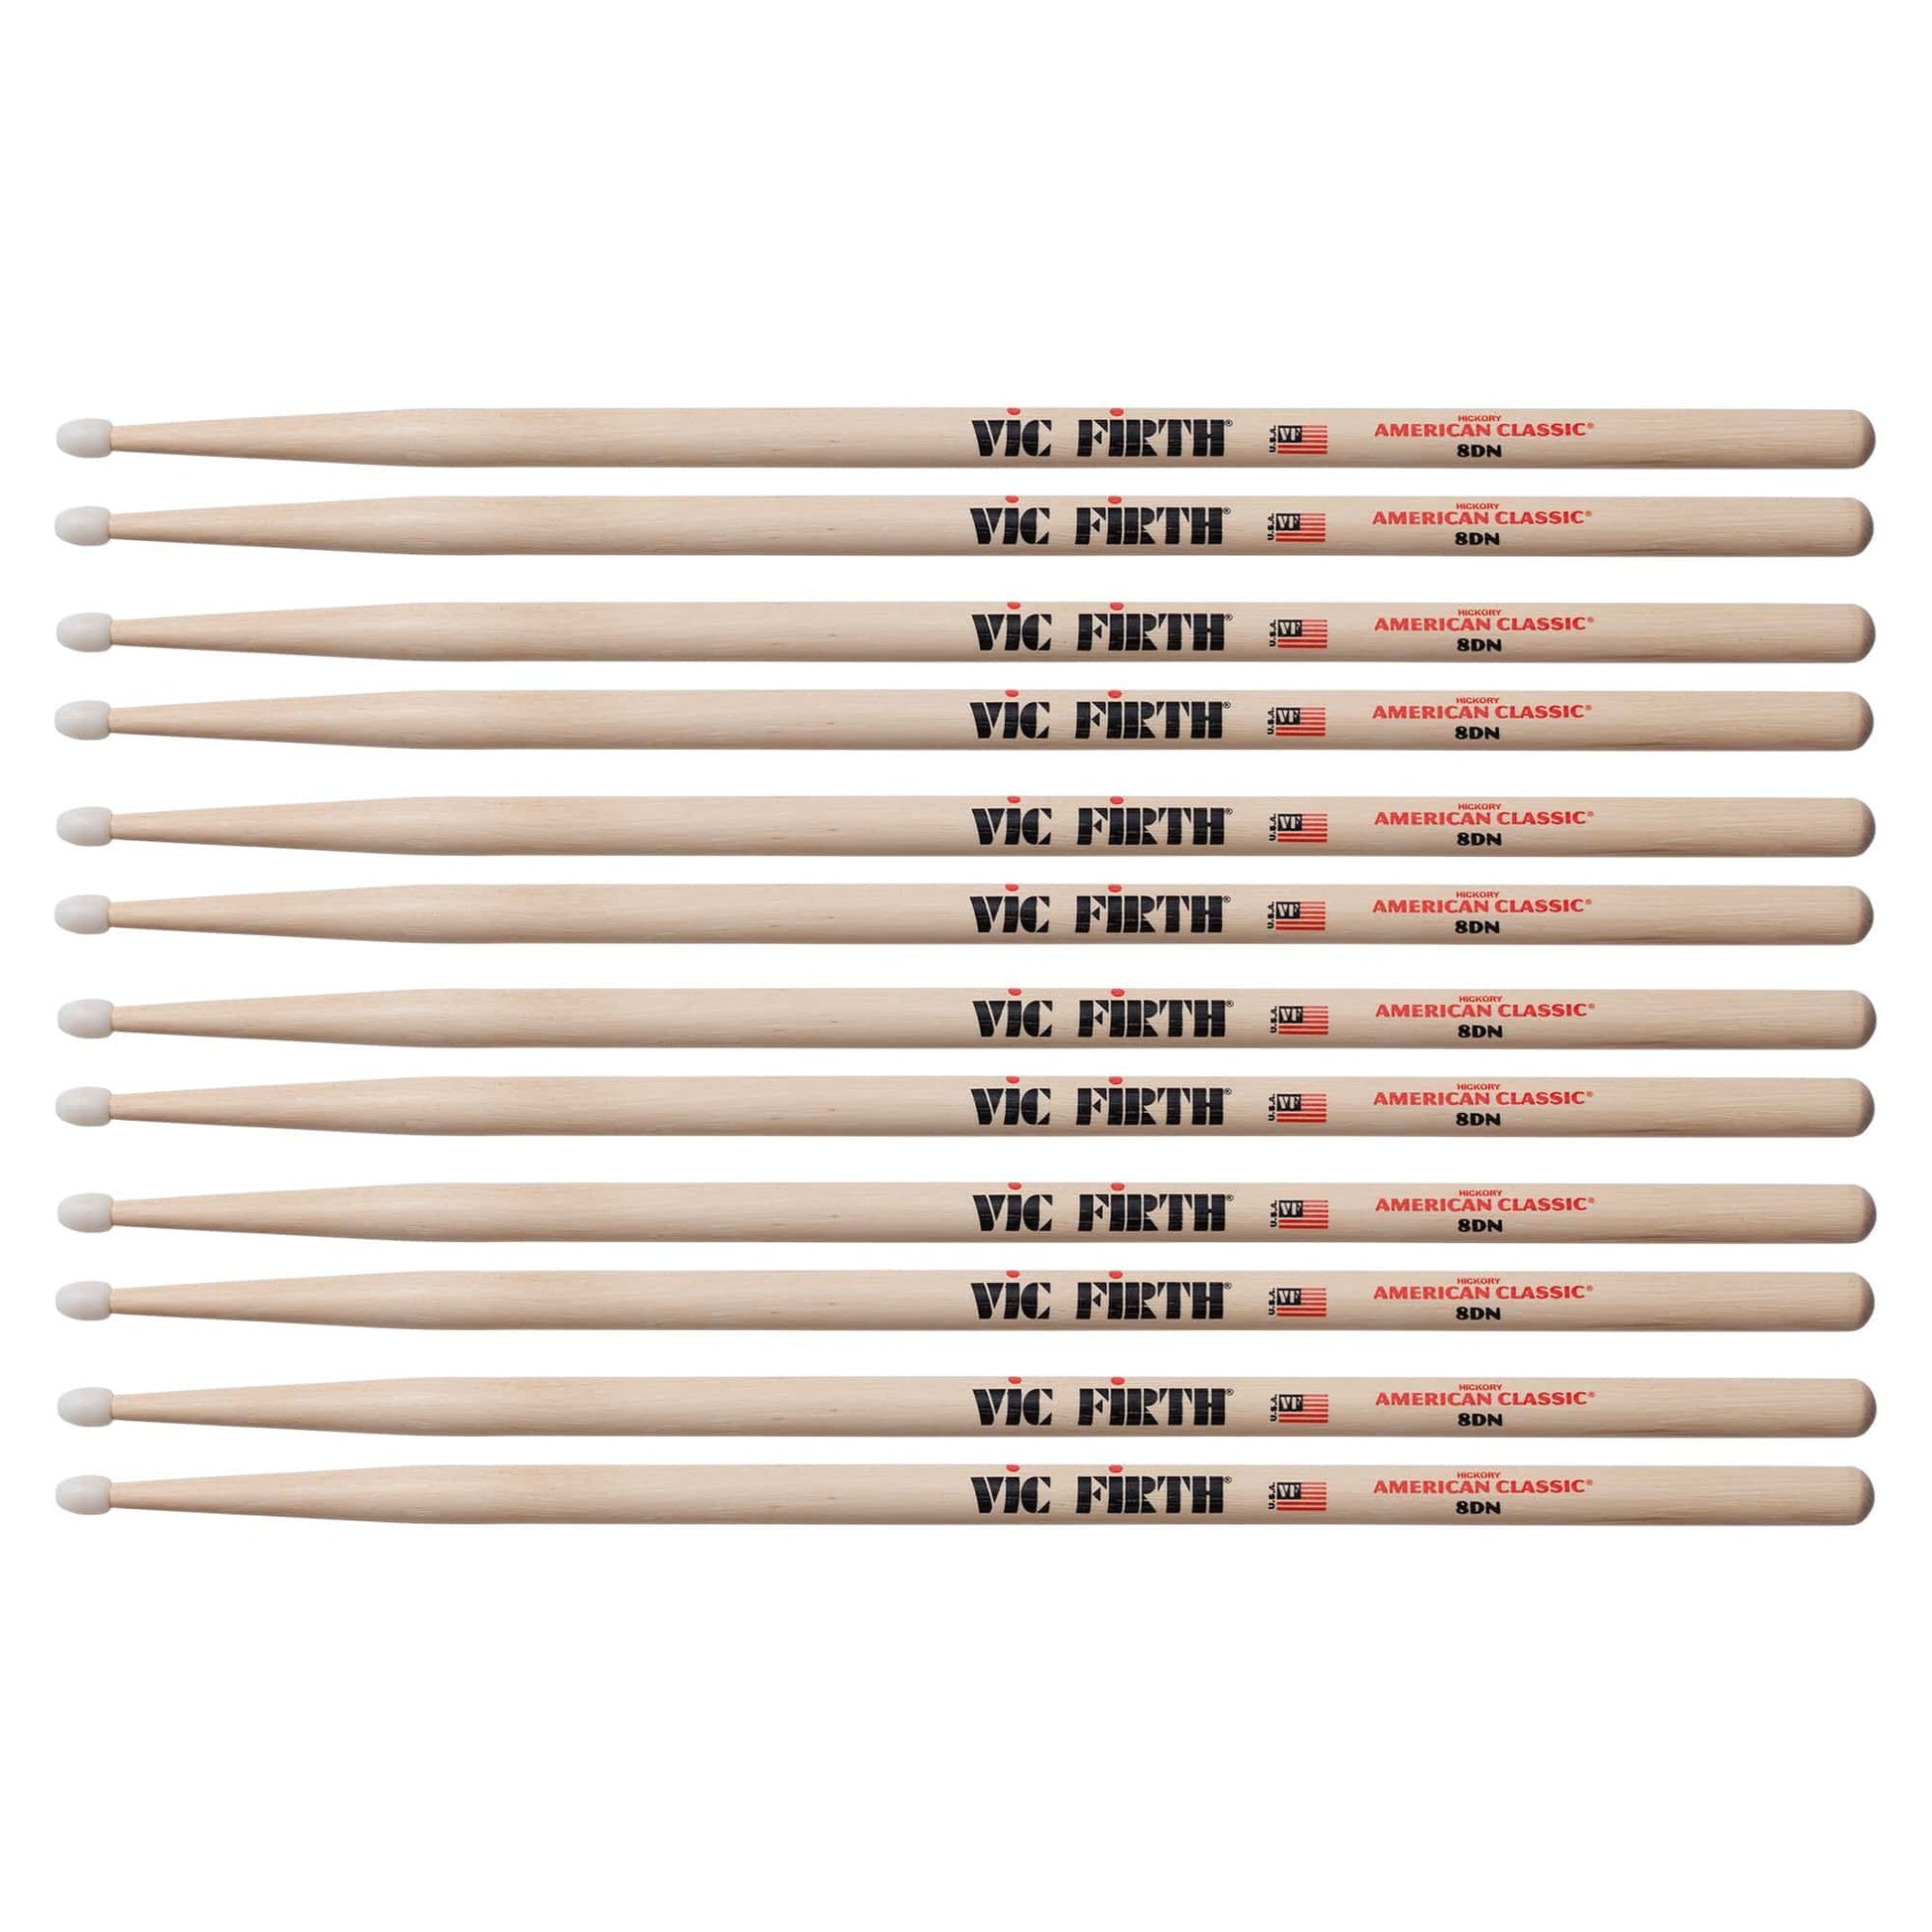 Vic Firth American Classic 8DN Nylon Tip Drum Sticks (6 Pair Bundle) Drums and Percussion / Parts and Accessories / Drum Sticks and Mallets